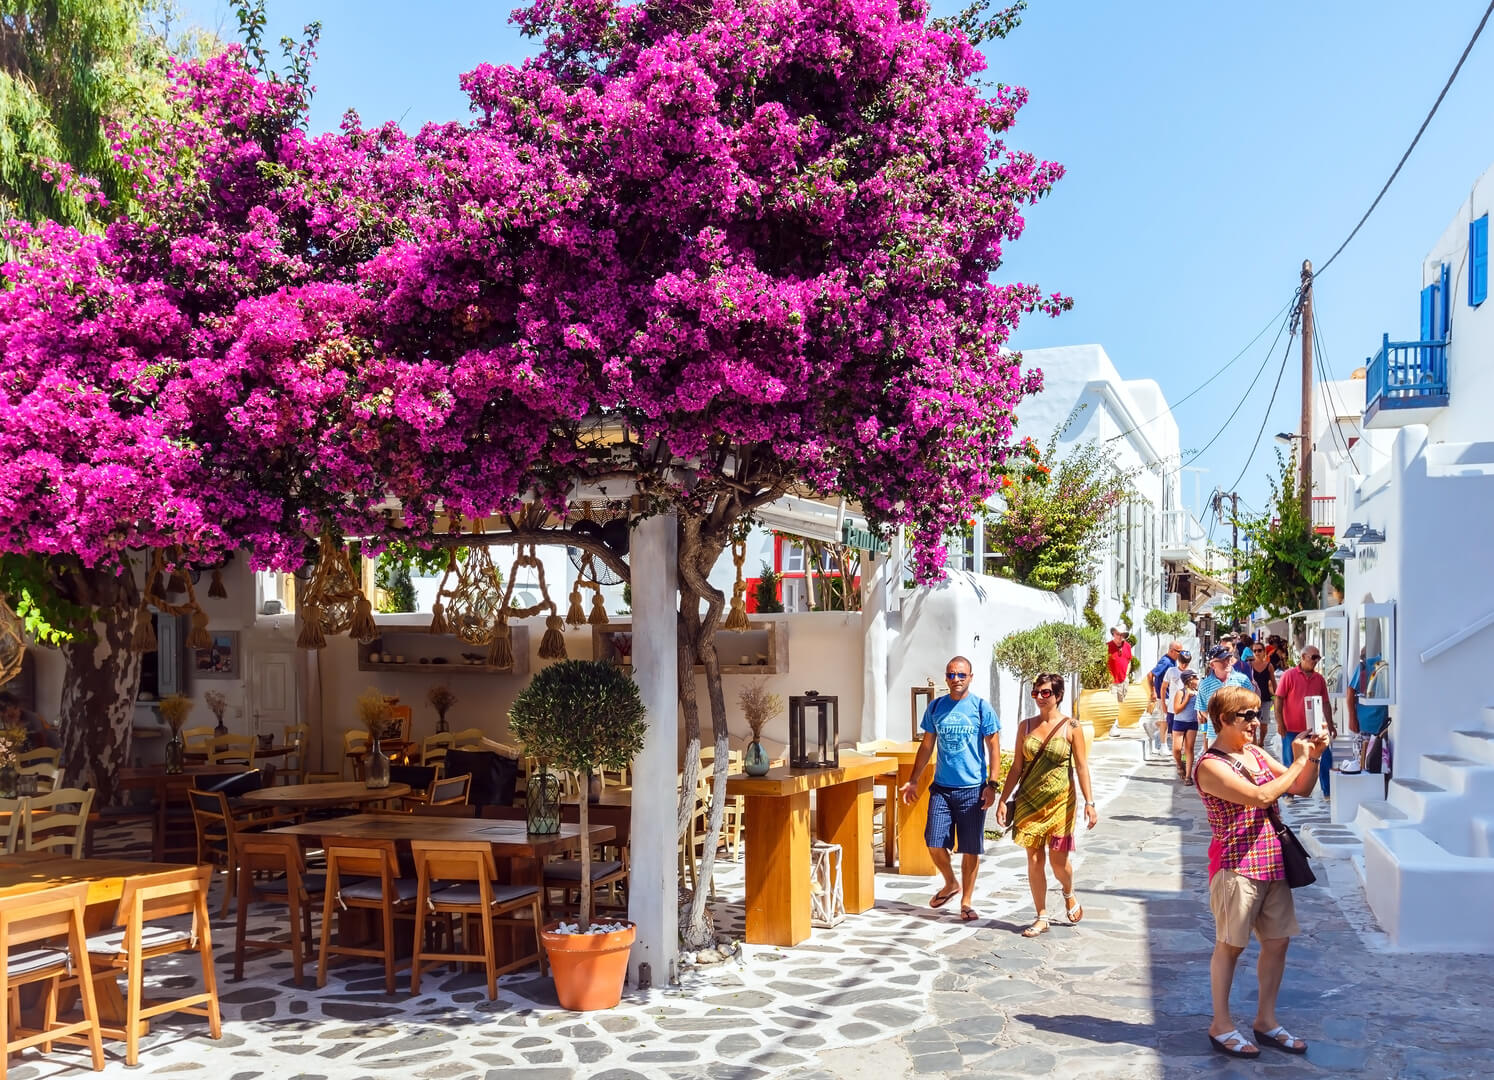 Shops and bars by street at the famous tourist spot of downtown on island Mykonos, Greece on June 16,2015.